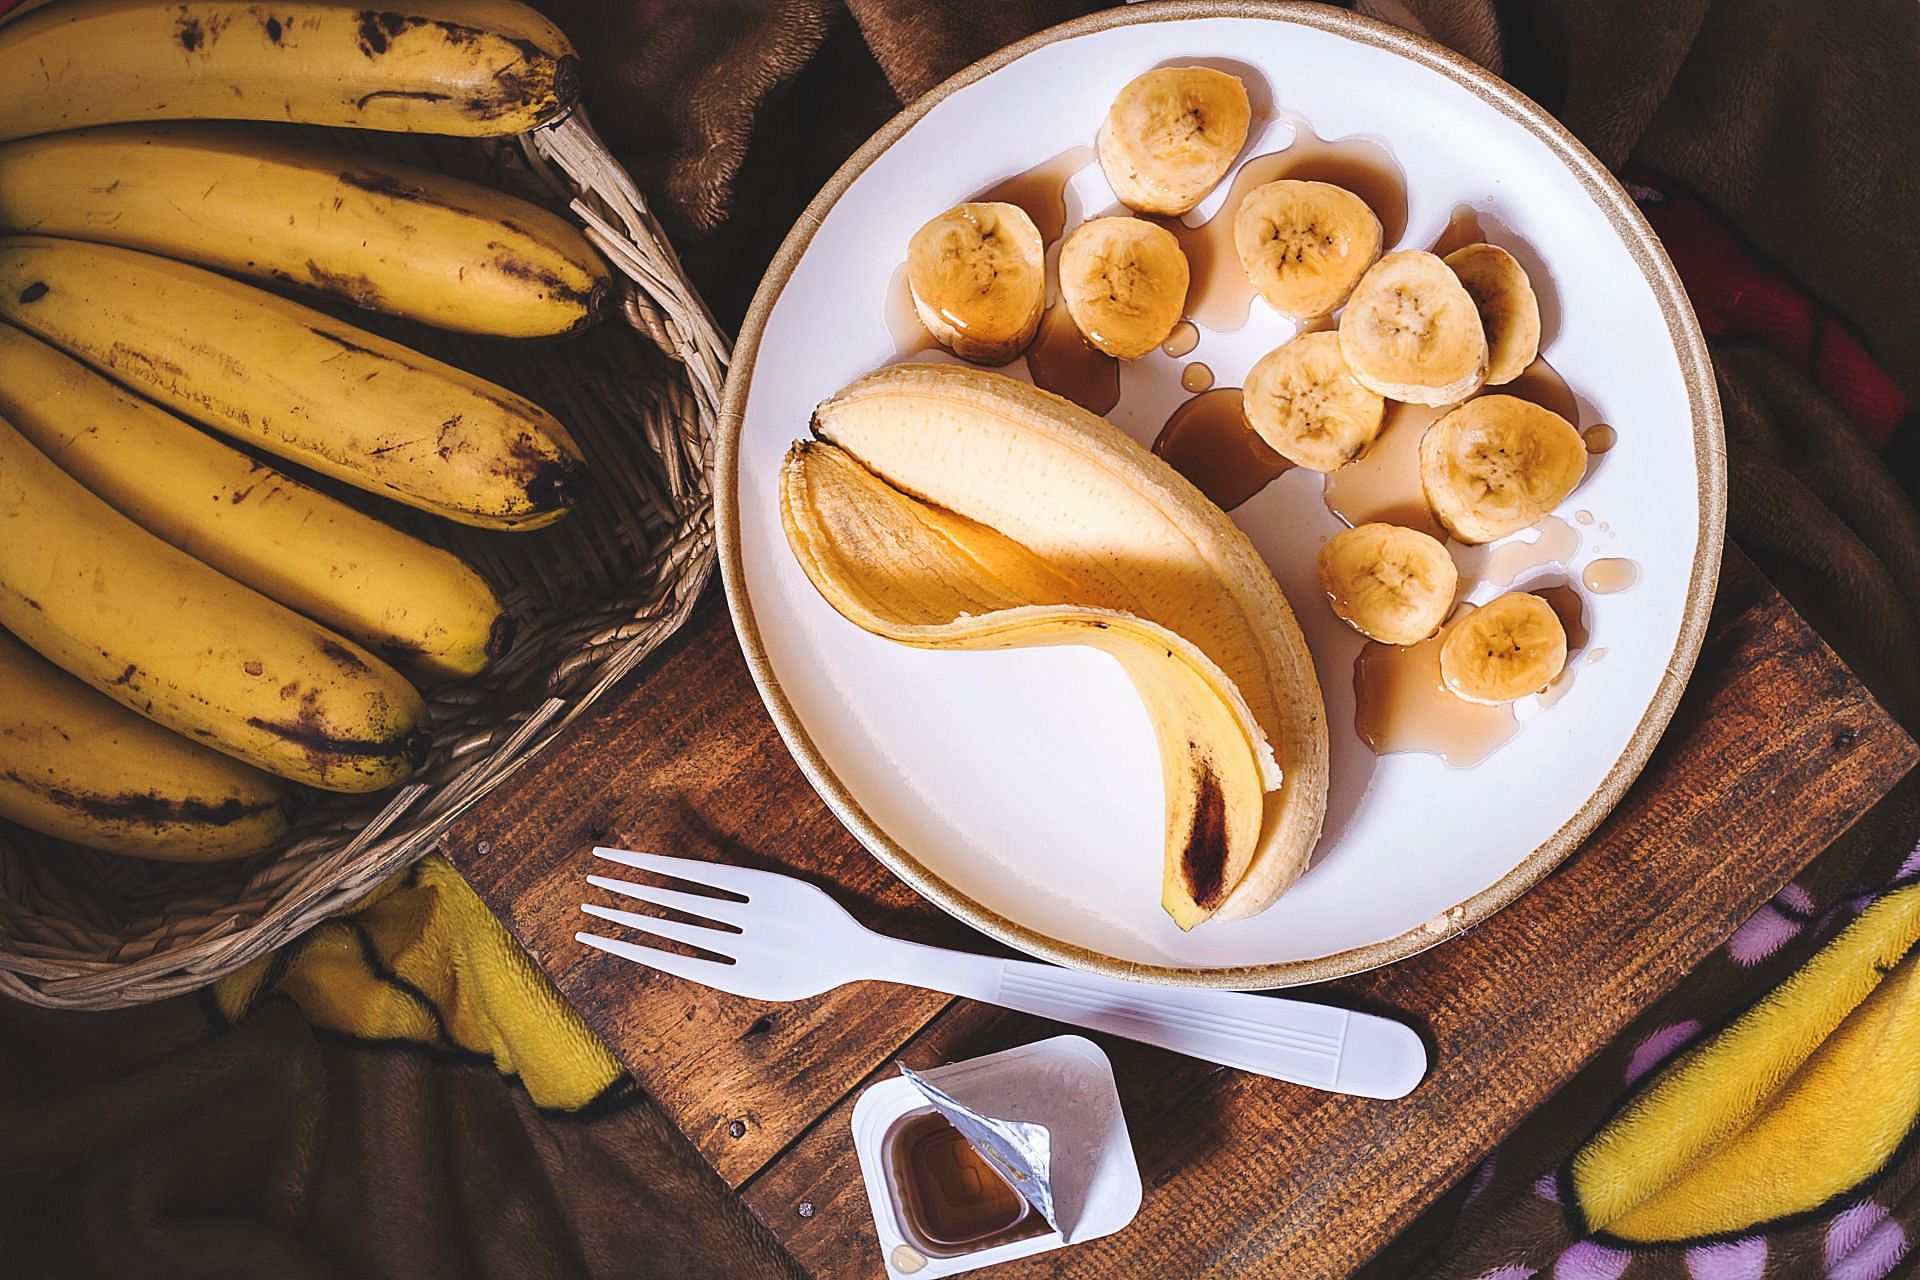 is banana good for constipation? acts as a natural laxative. (Image via unsplash / elliv aceron)